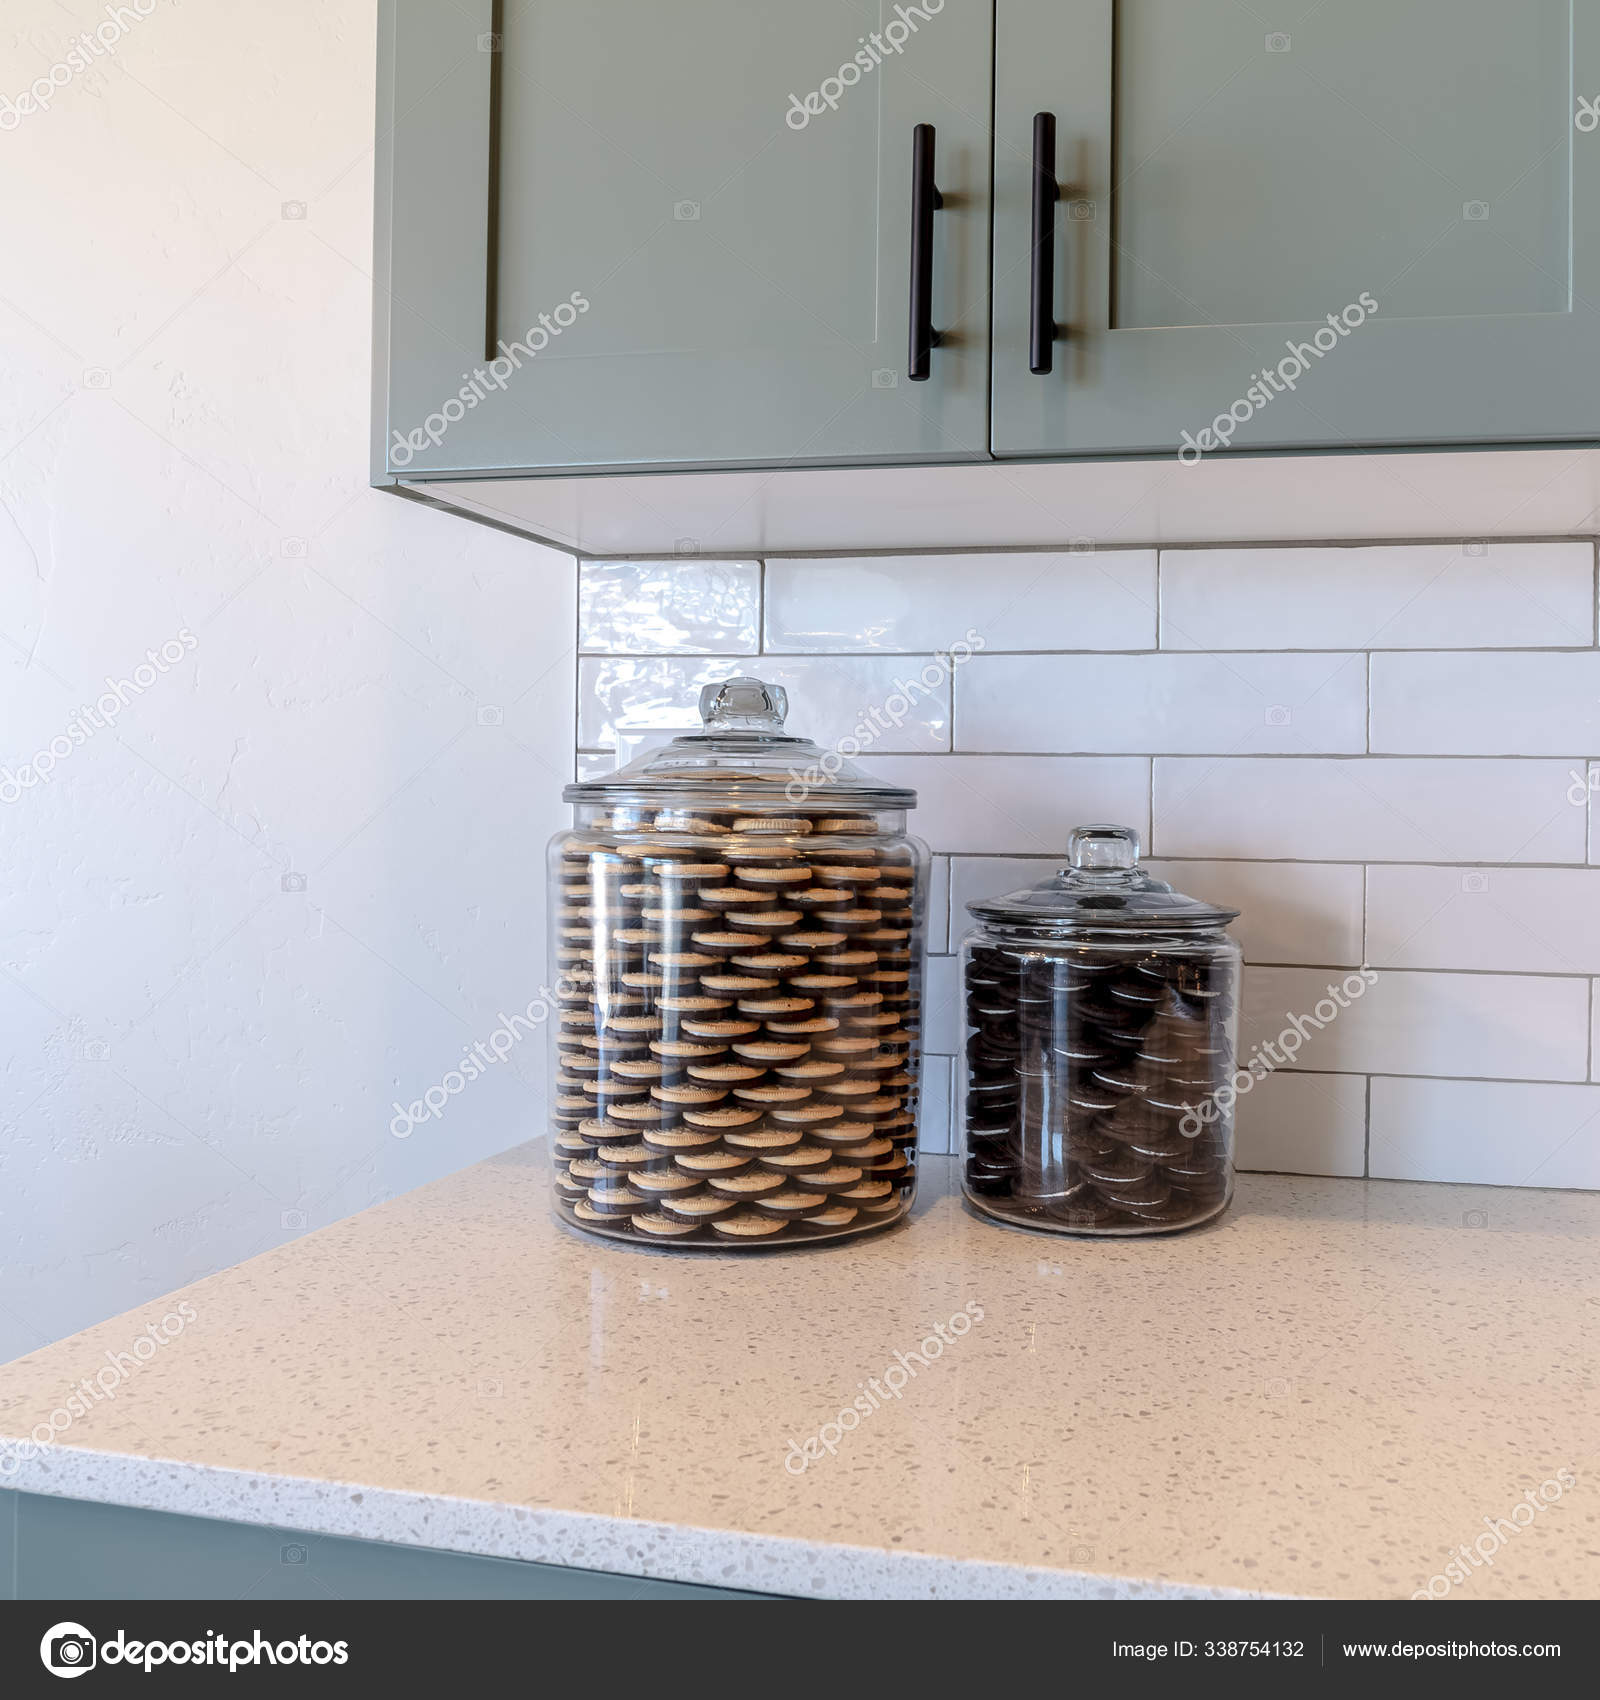 Square Jars of cookies on kitchen counter top against tile